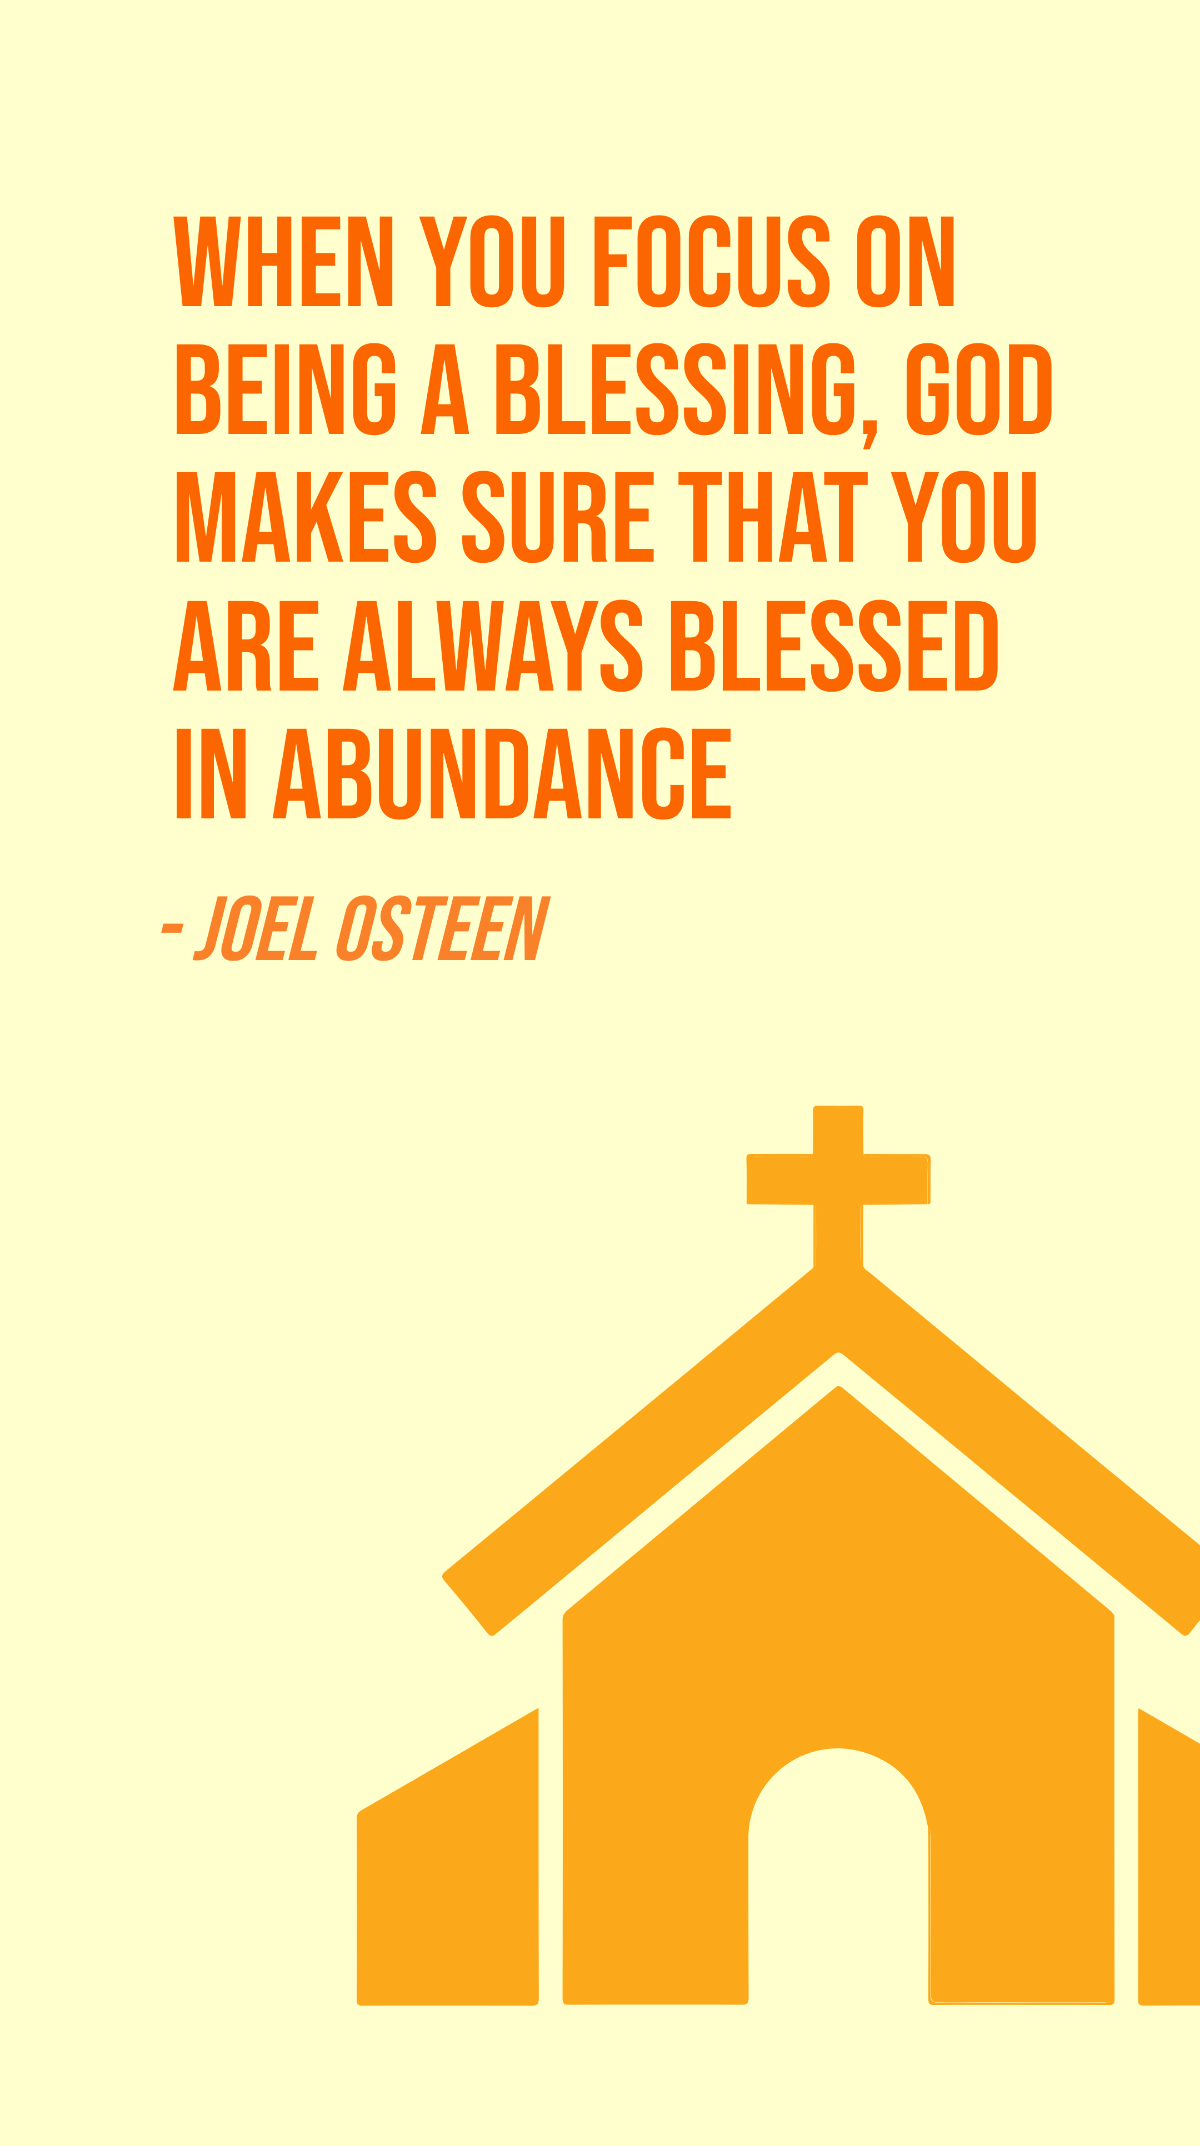 Joel Osteen - When you focus on being a blessing, God makes sure that you are always blessed in abundance Template